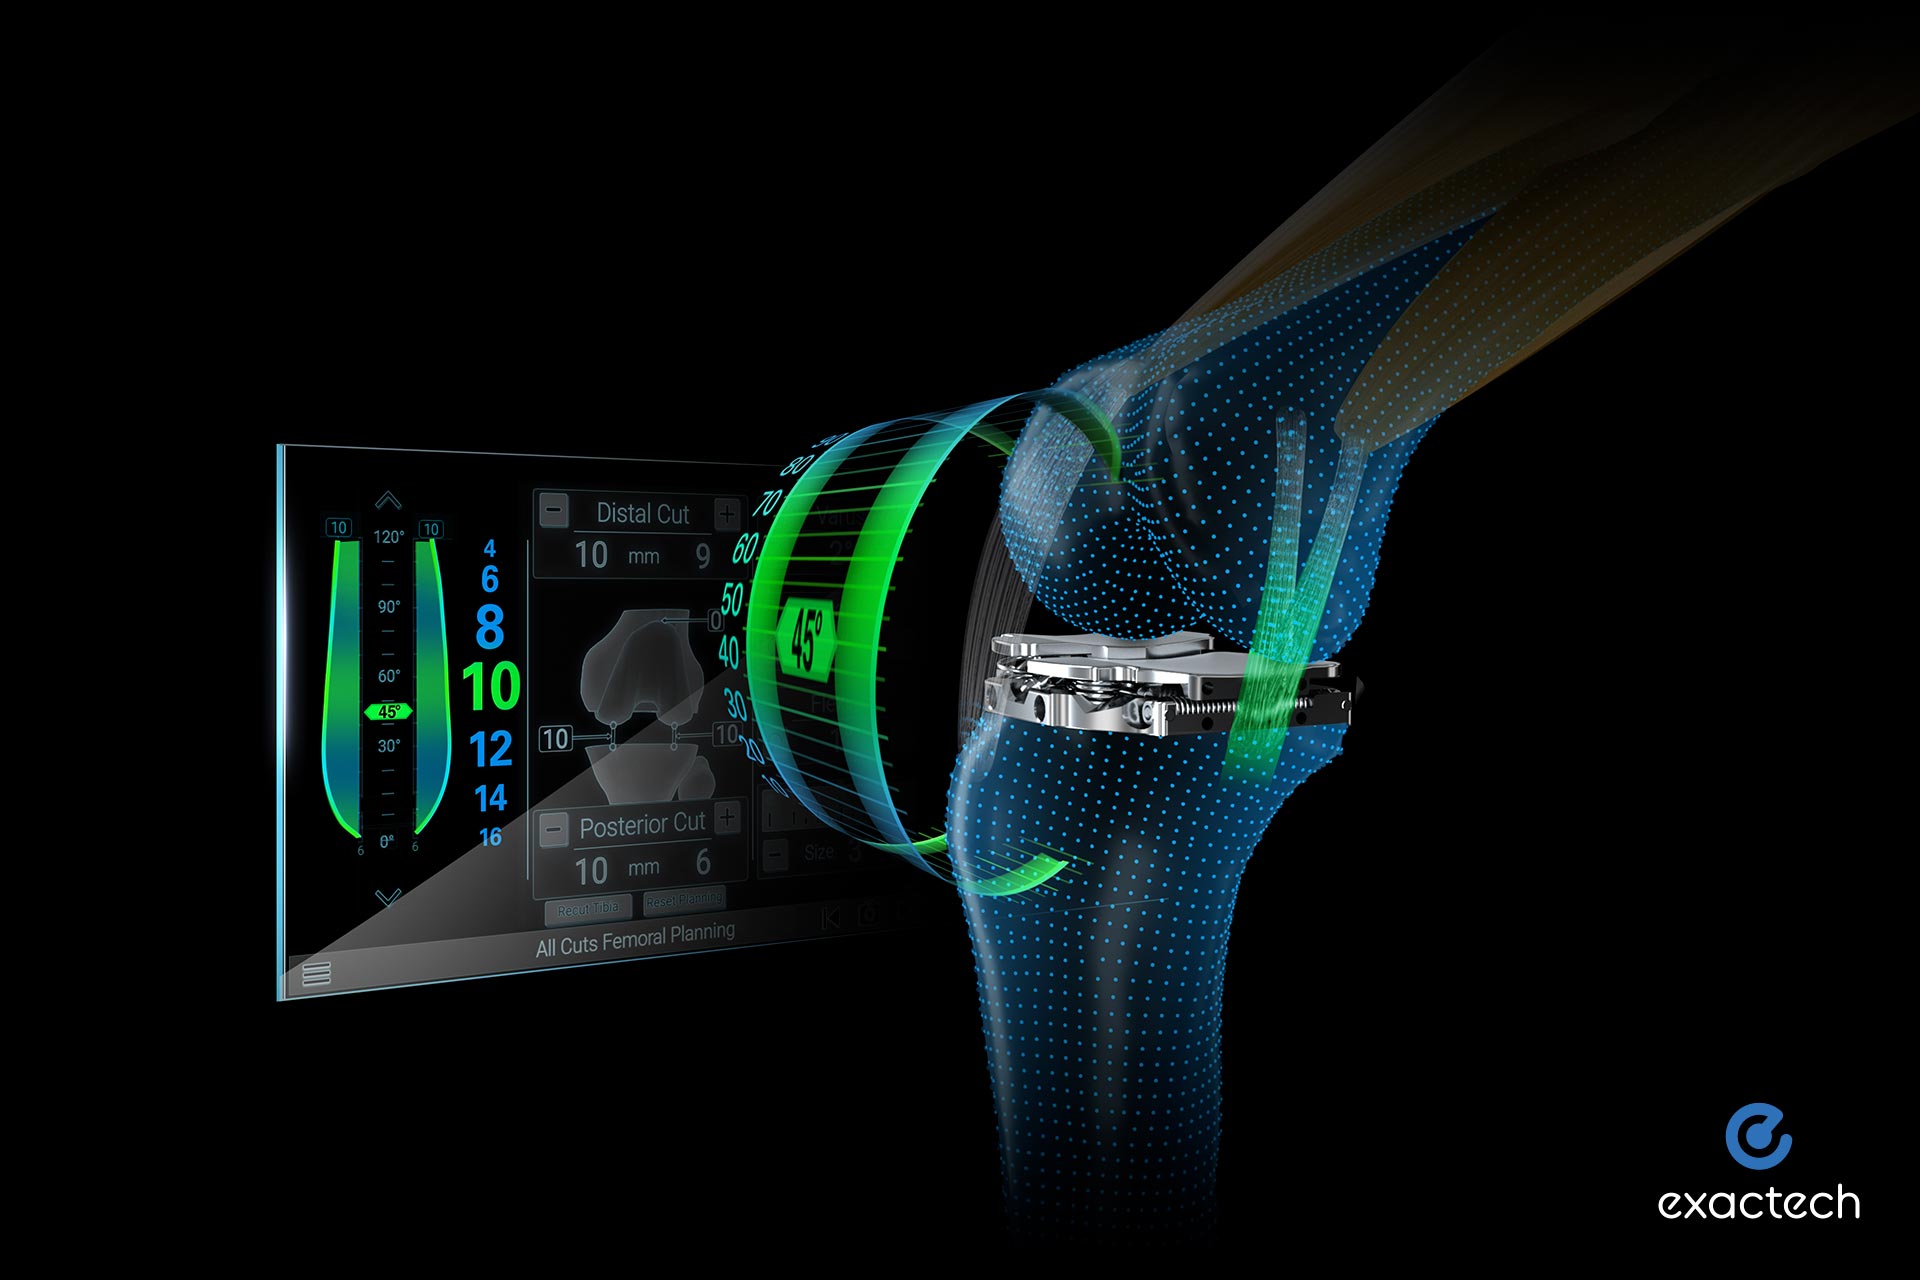 web_News_Exactech-Announces-Successful-First-Surgeries-with-Expanded-Instrumentation-for-its-Newton-Balanced-Knee-System_Hero